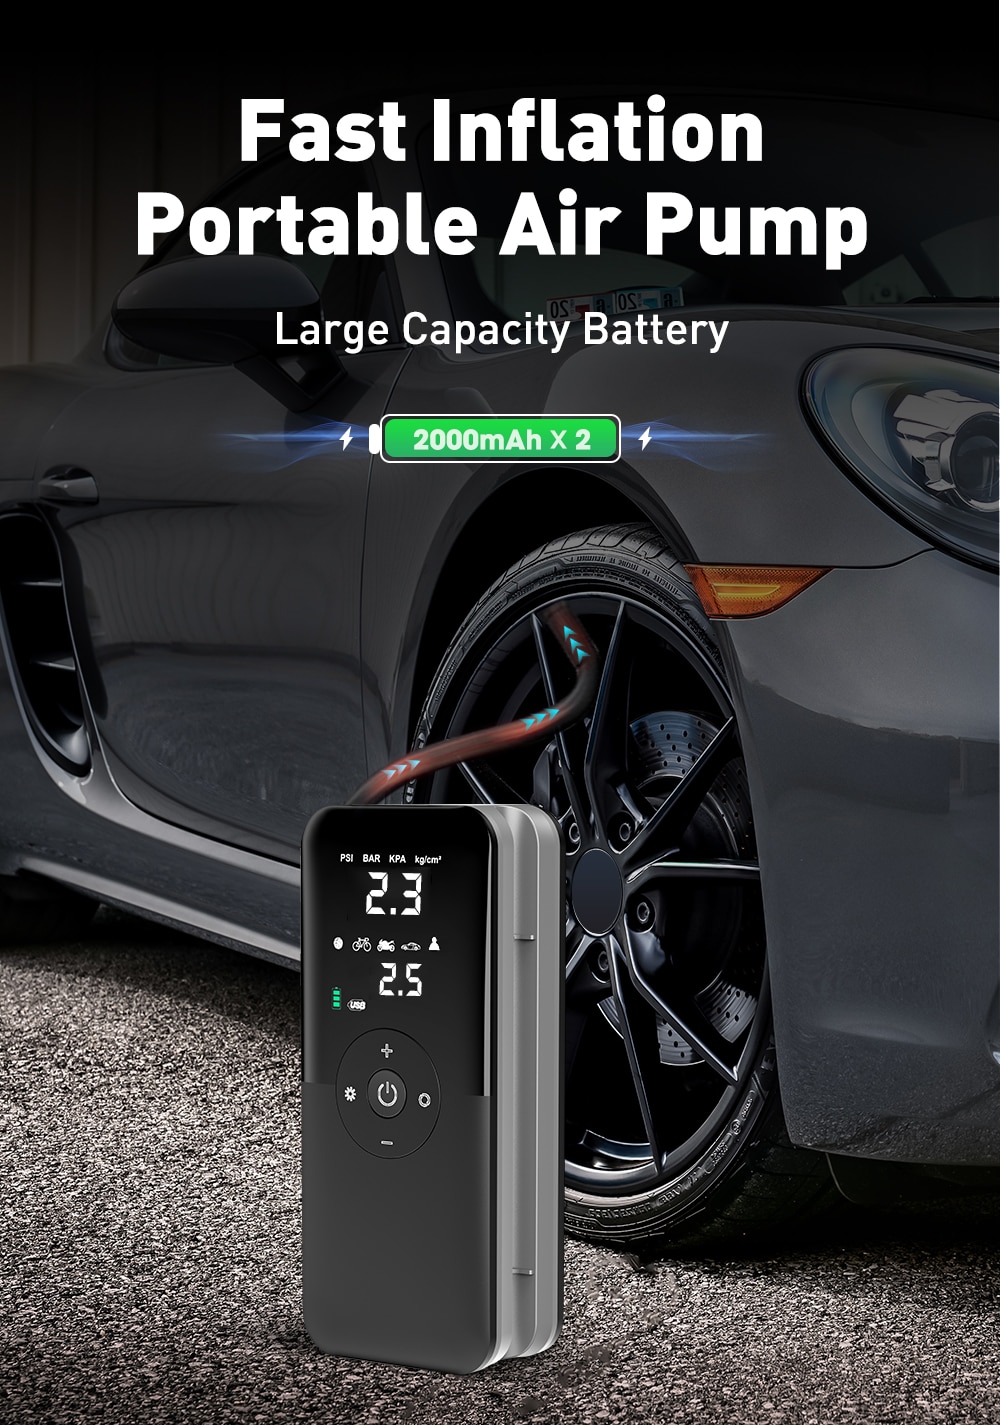 Air Compressor 12v Air Pump For Car Portable Tyre Inflator Electric Motorcycle Pump Air Compressor For Car Motorcycles Bicycles